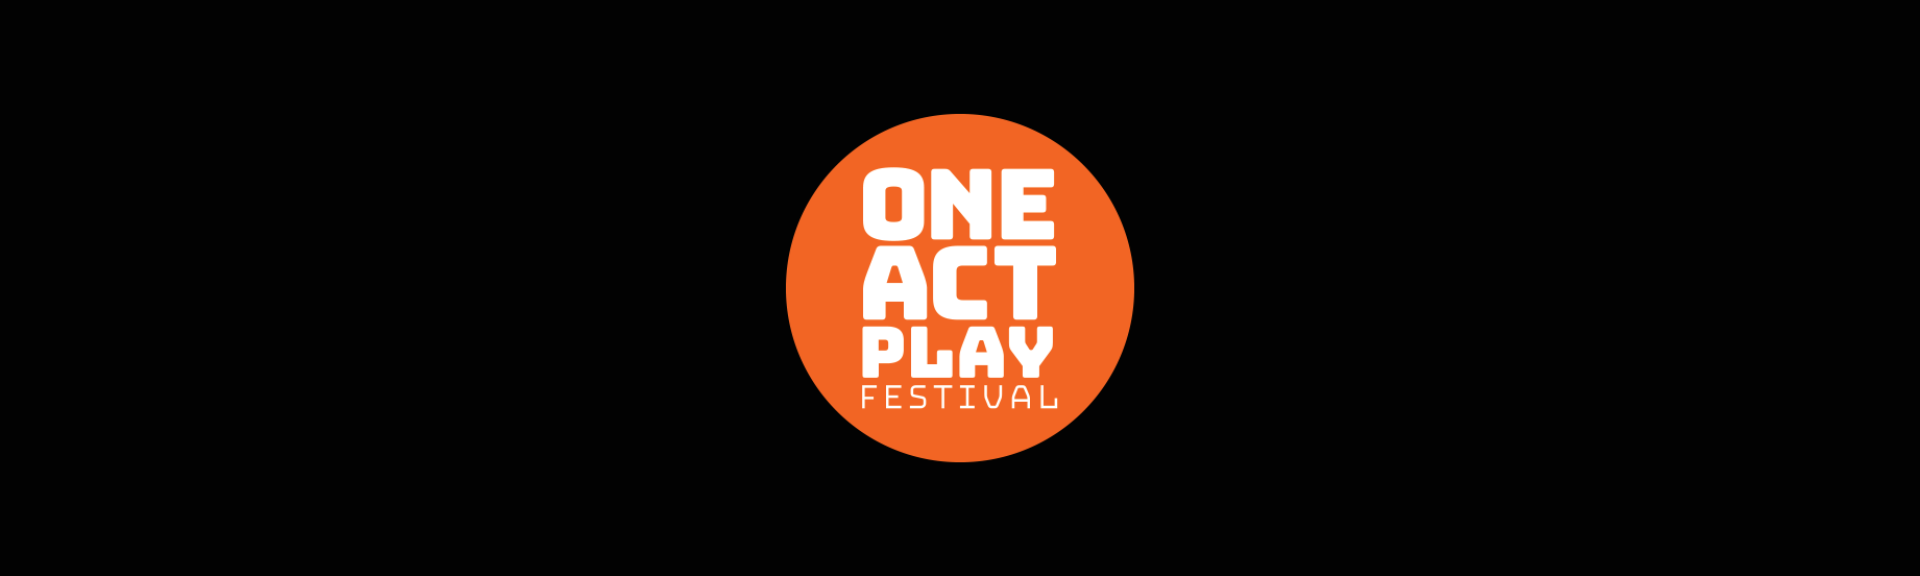 One Act Play Festival - logo